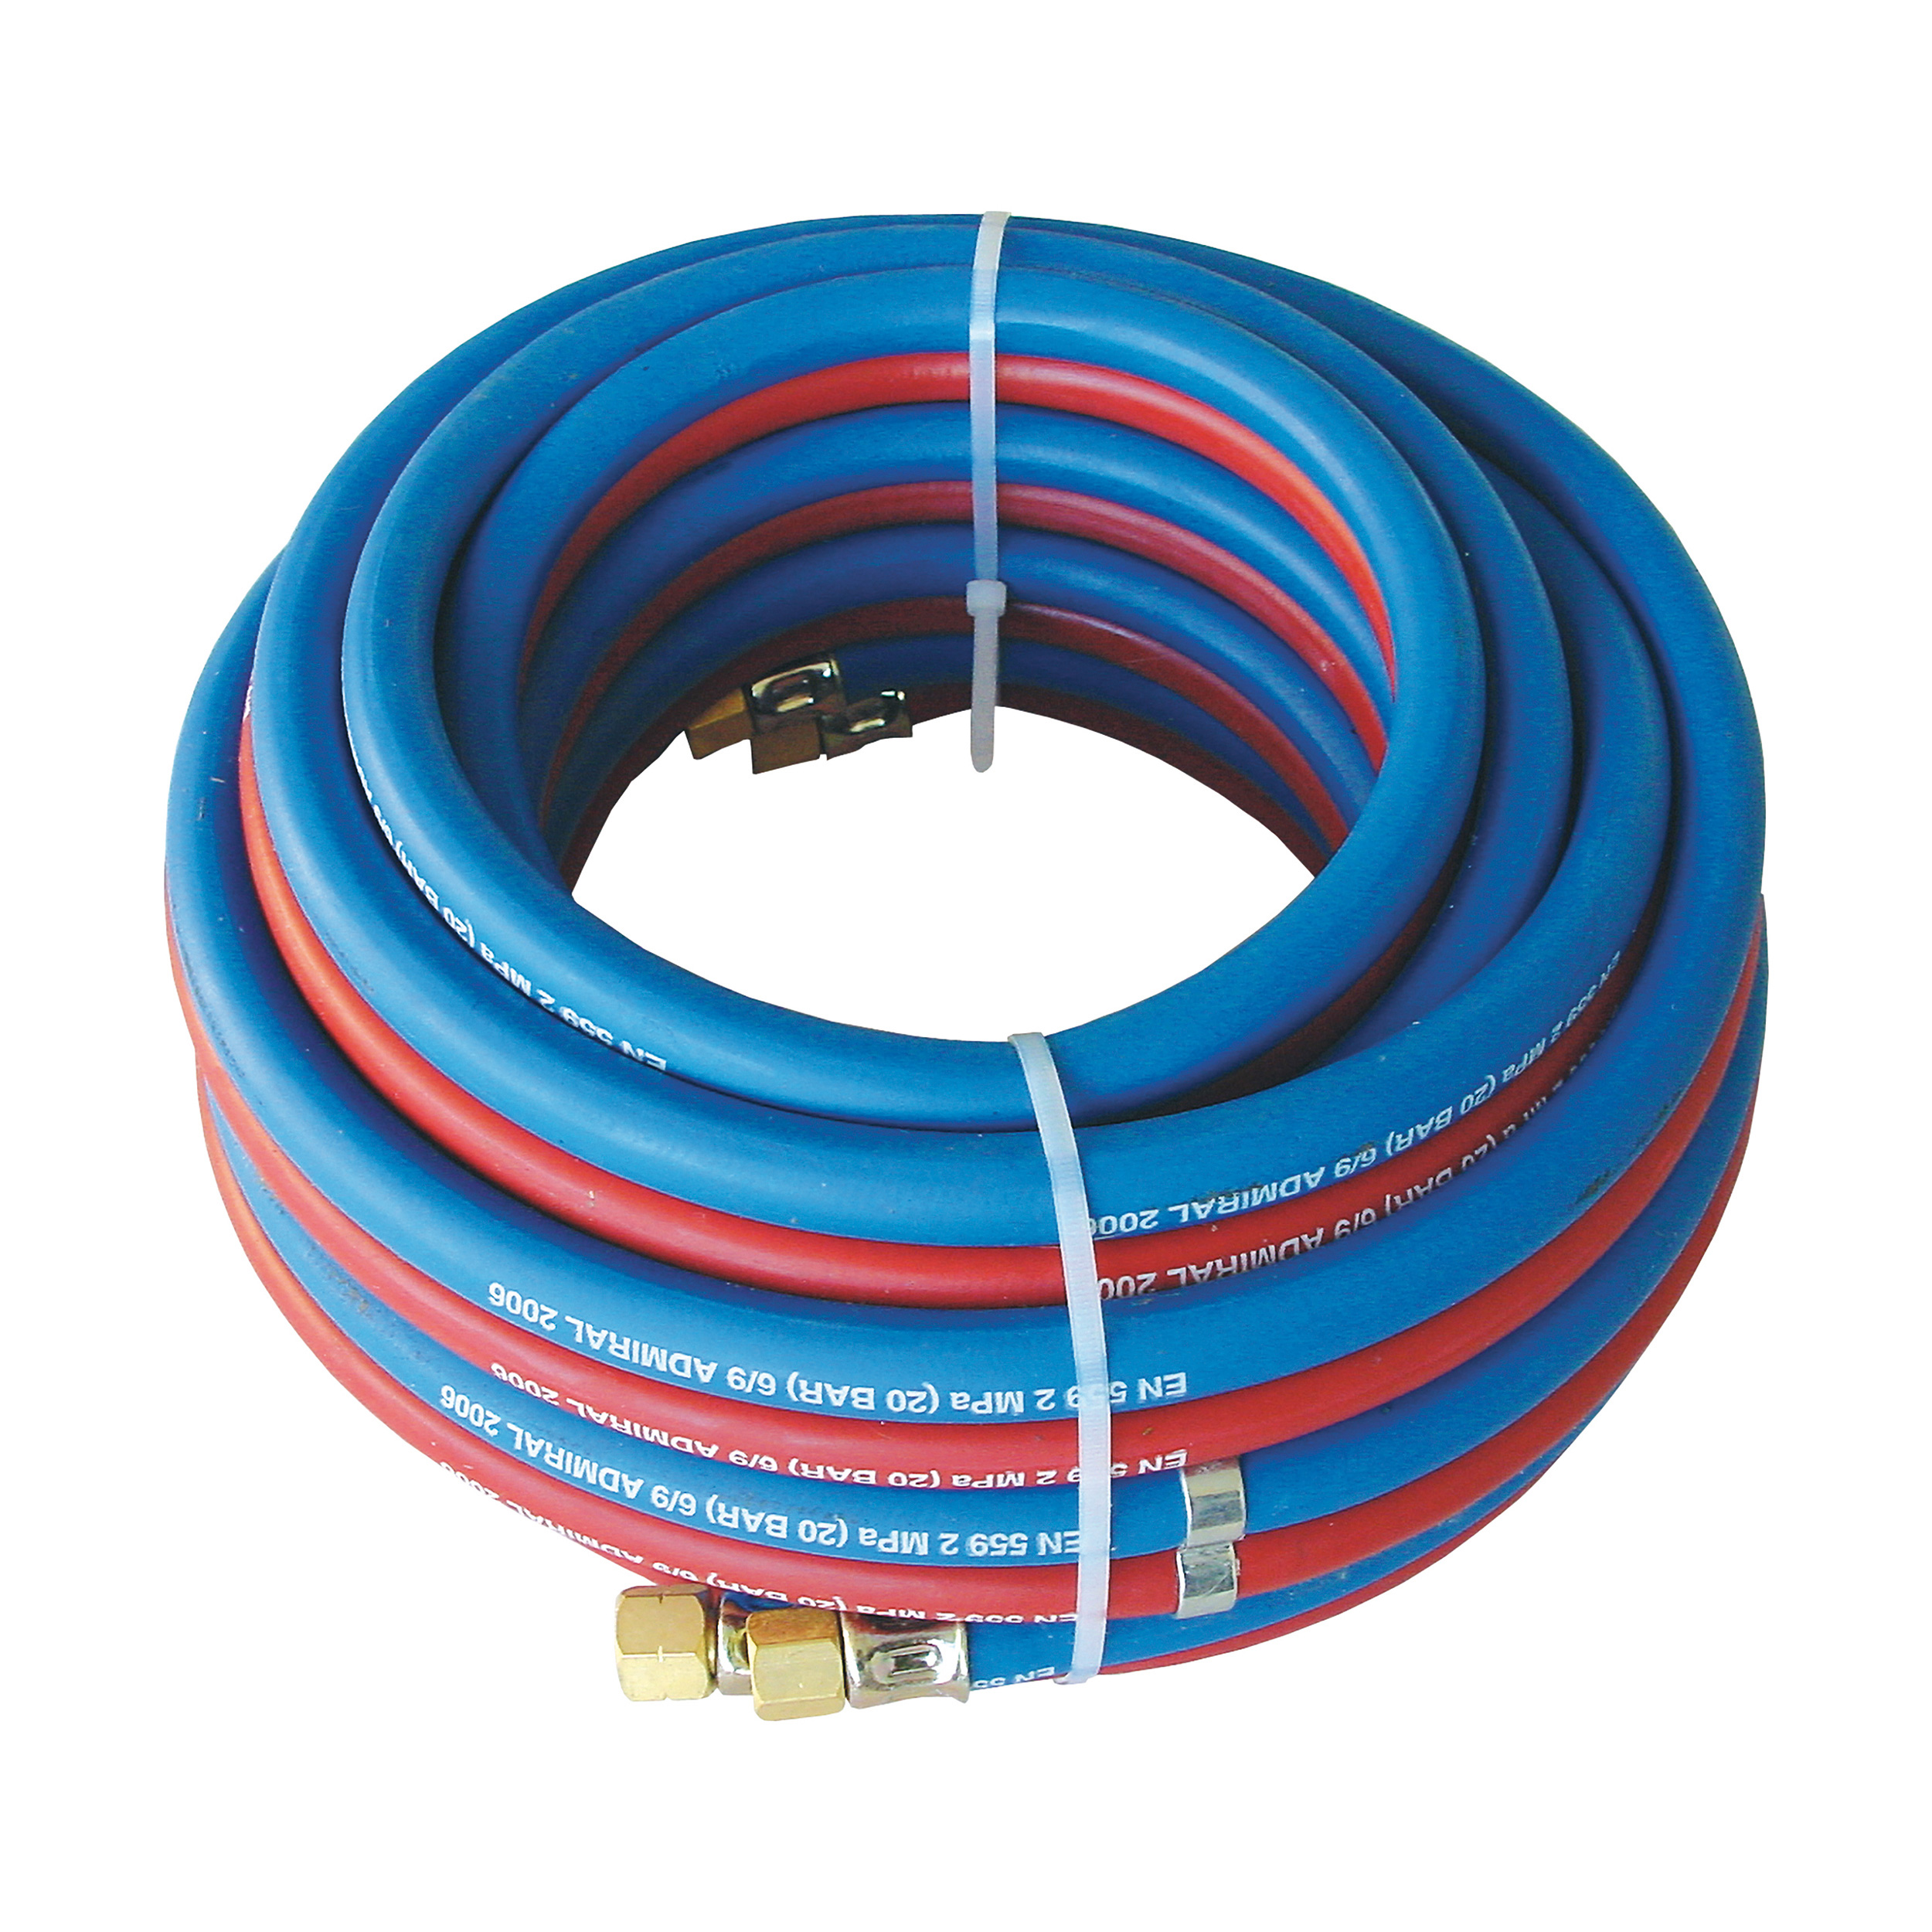 Autogenous double hose, ready-for-use